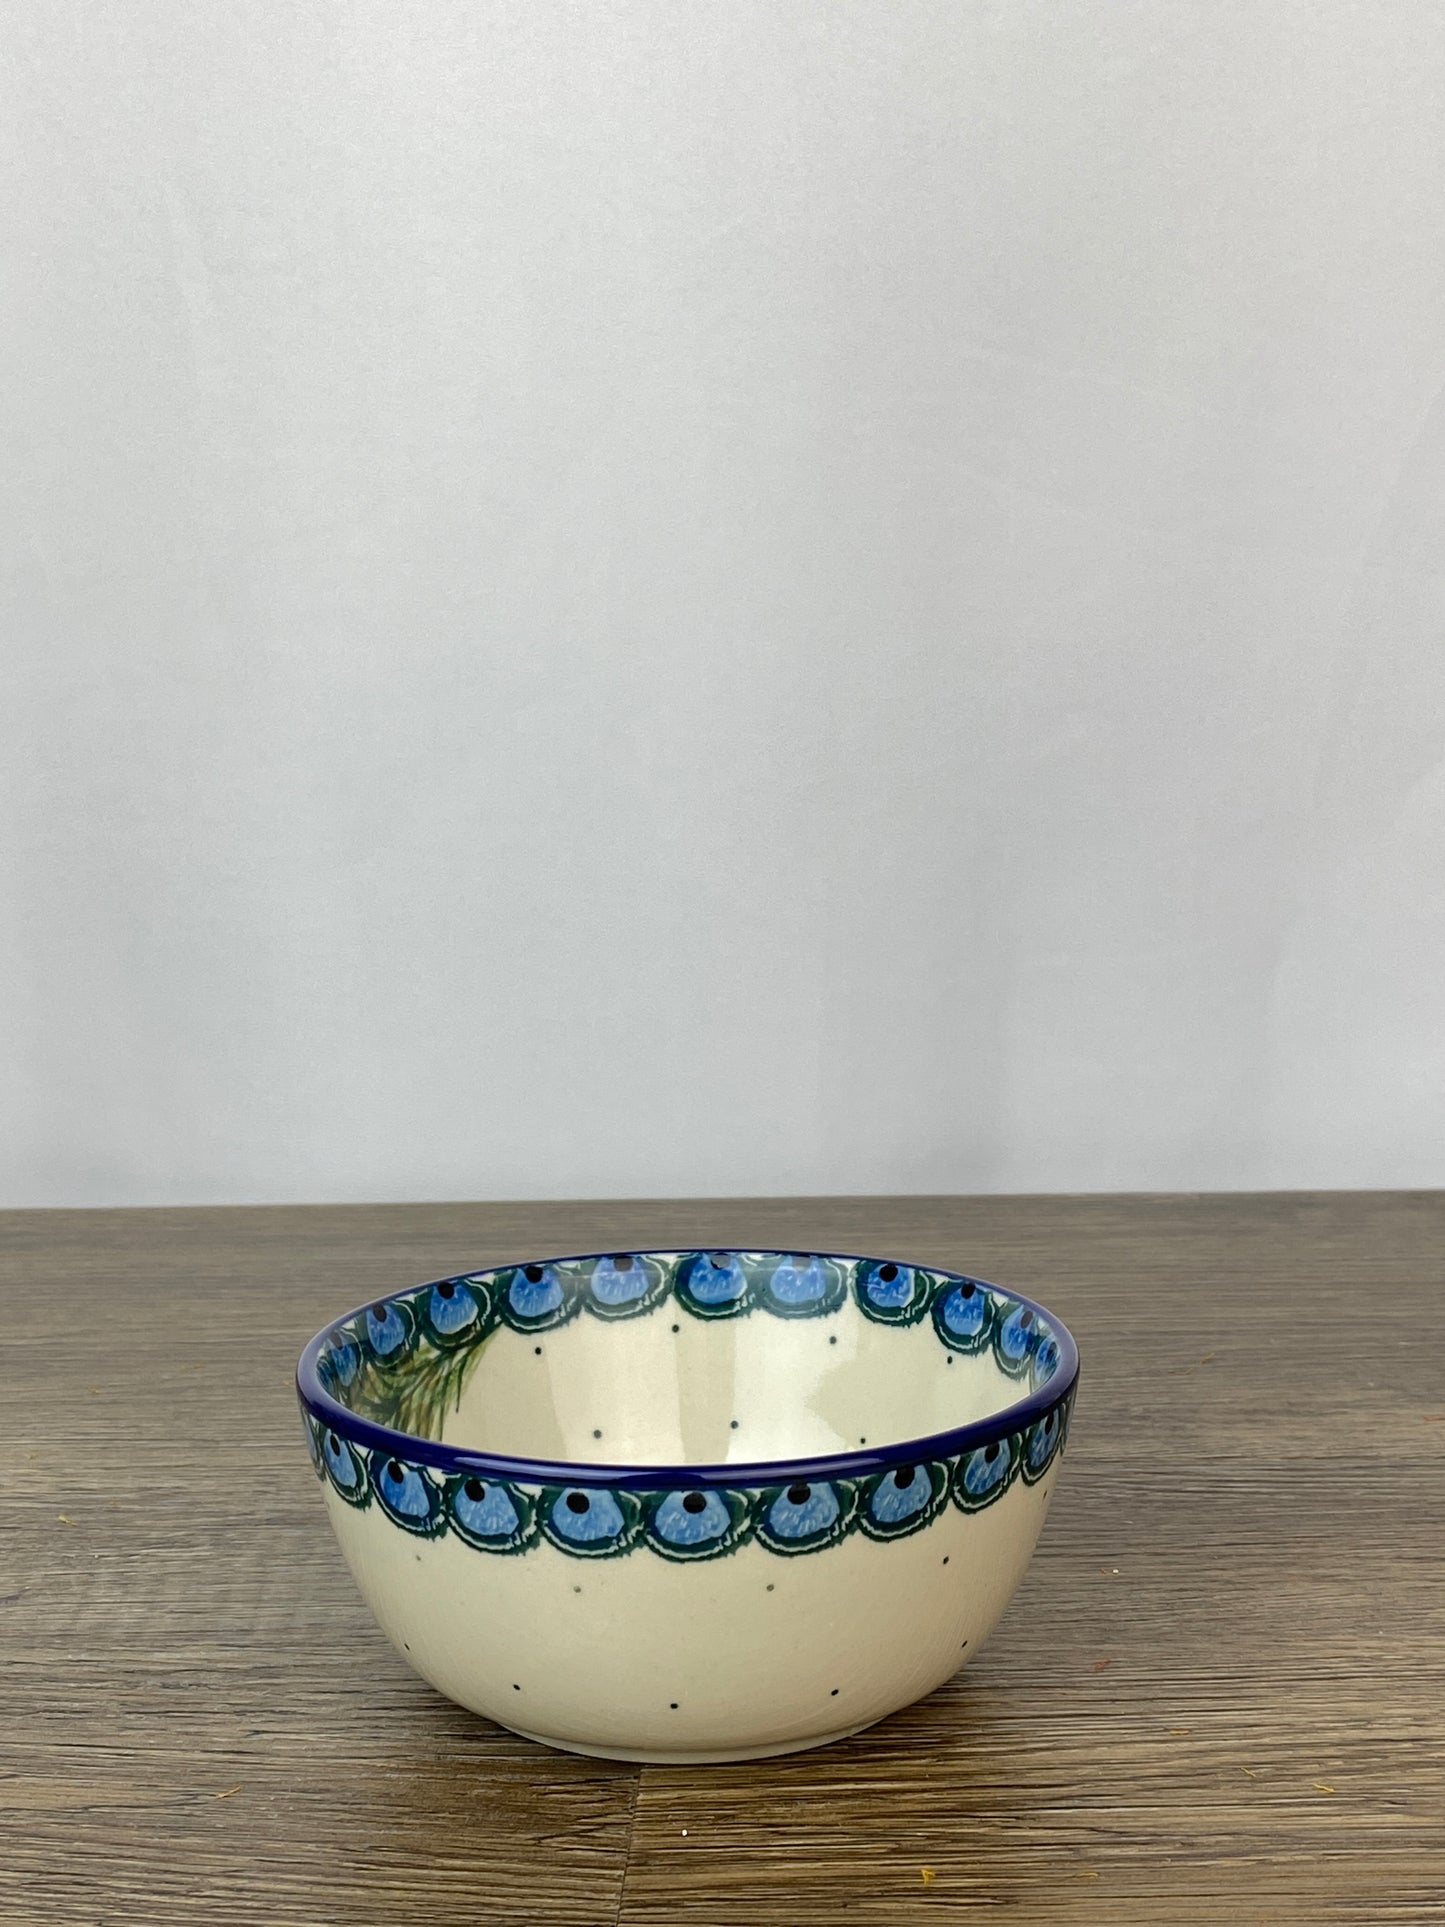 Small Cereal / Dessert Bowl - Shape 17 - Pattern 2127